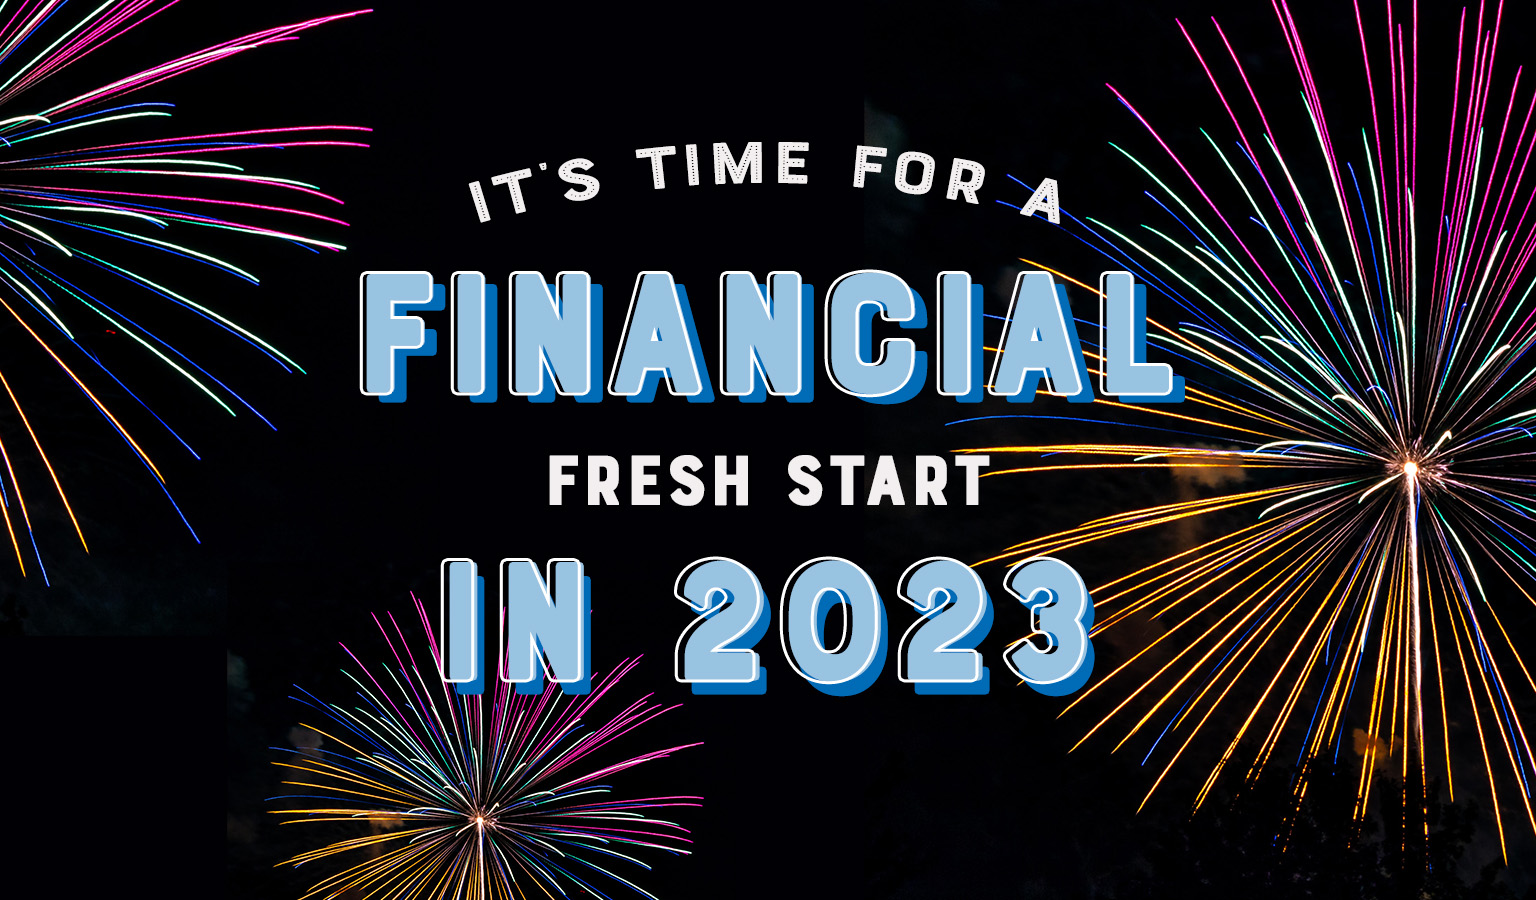 It’s Time for a Financial Fresh Start in 2023